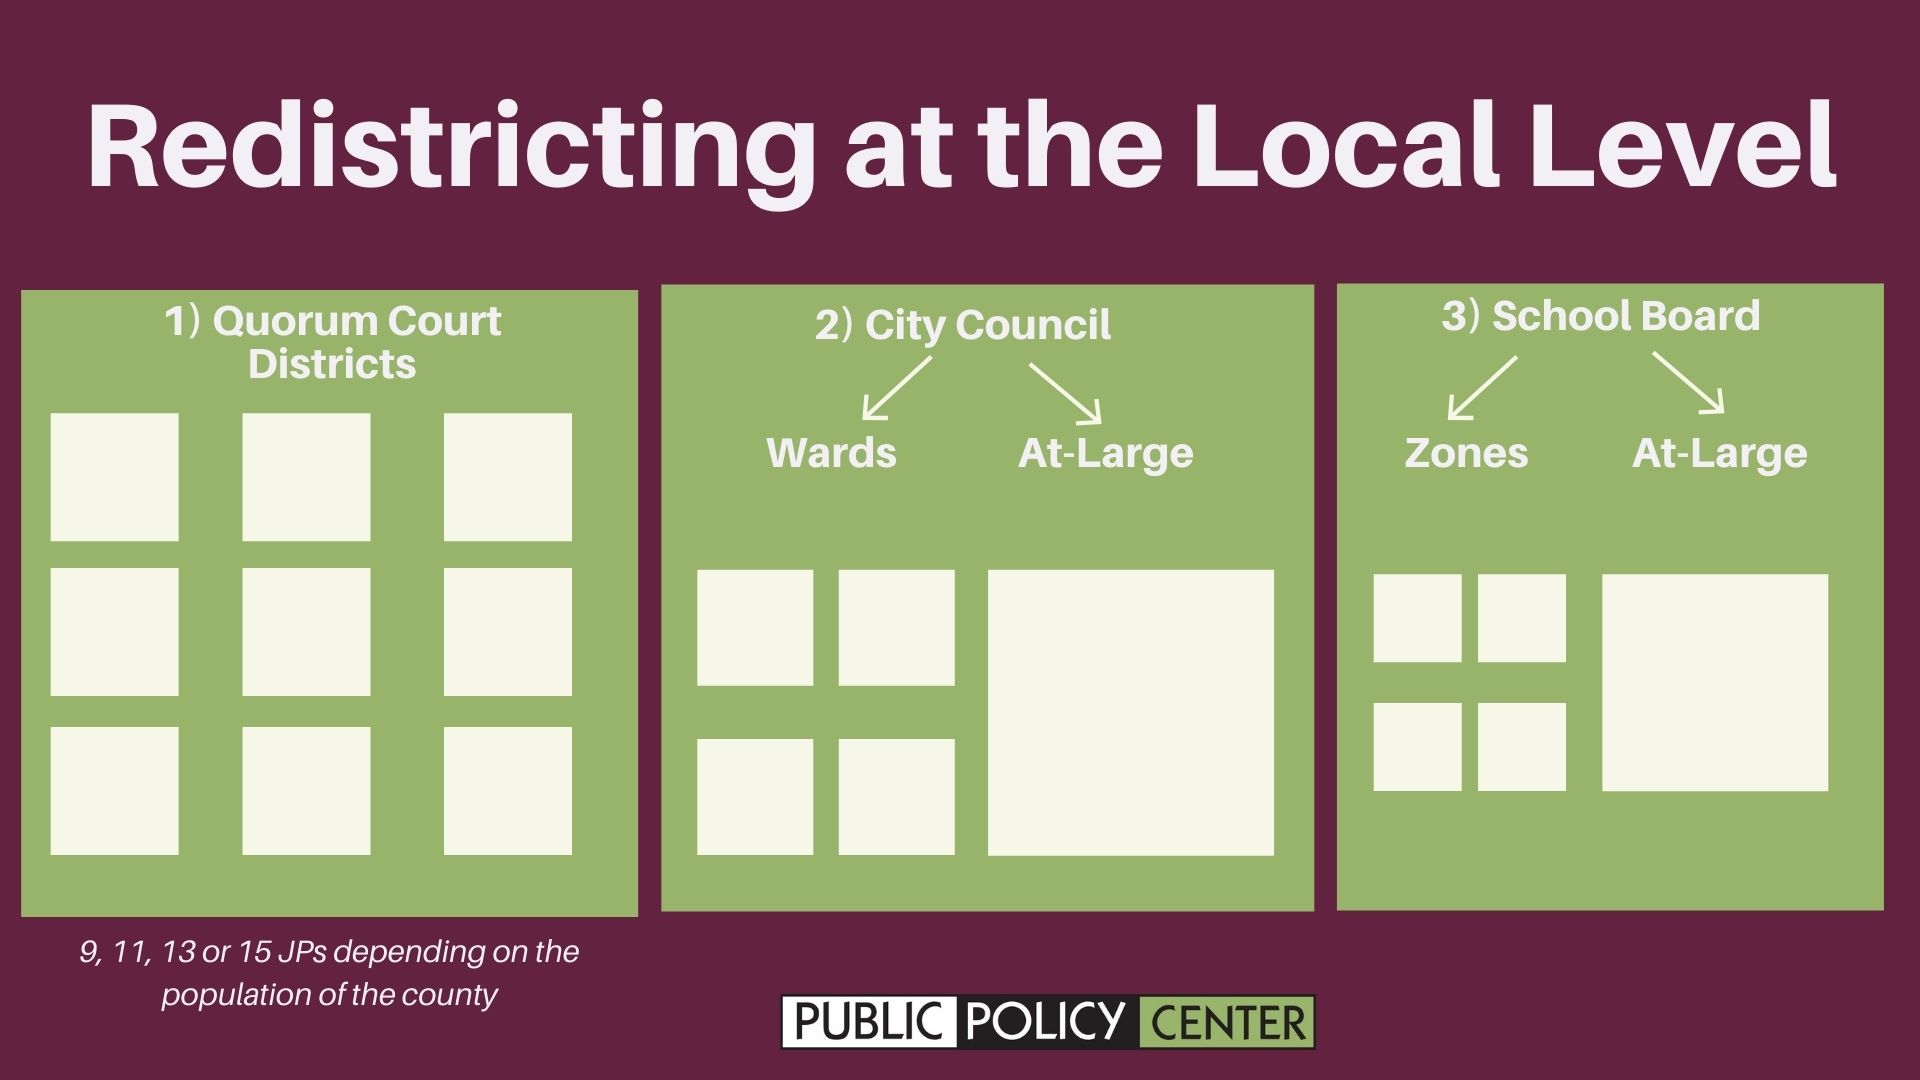 A presentation slide from the webinar that uses squares to explain how justices of the peace are elected by district; city councils are elected either to represent the entire city or by ward; and school board members are elected by zone or district-wide.